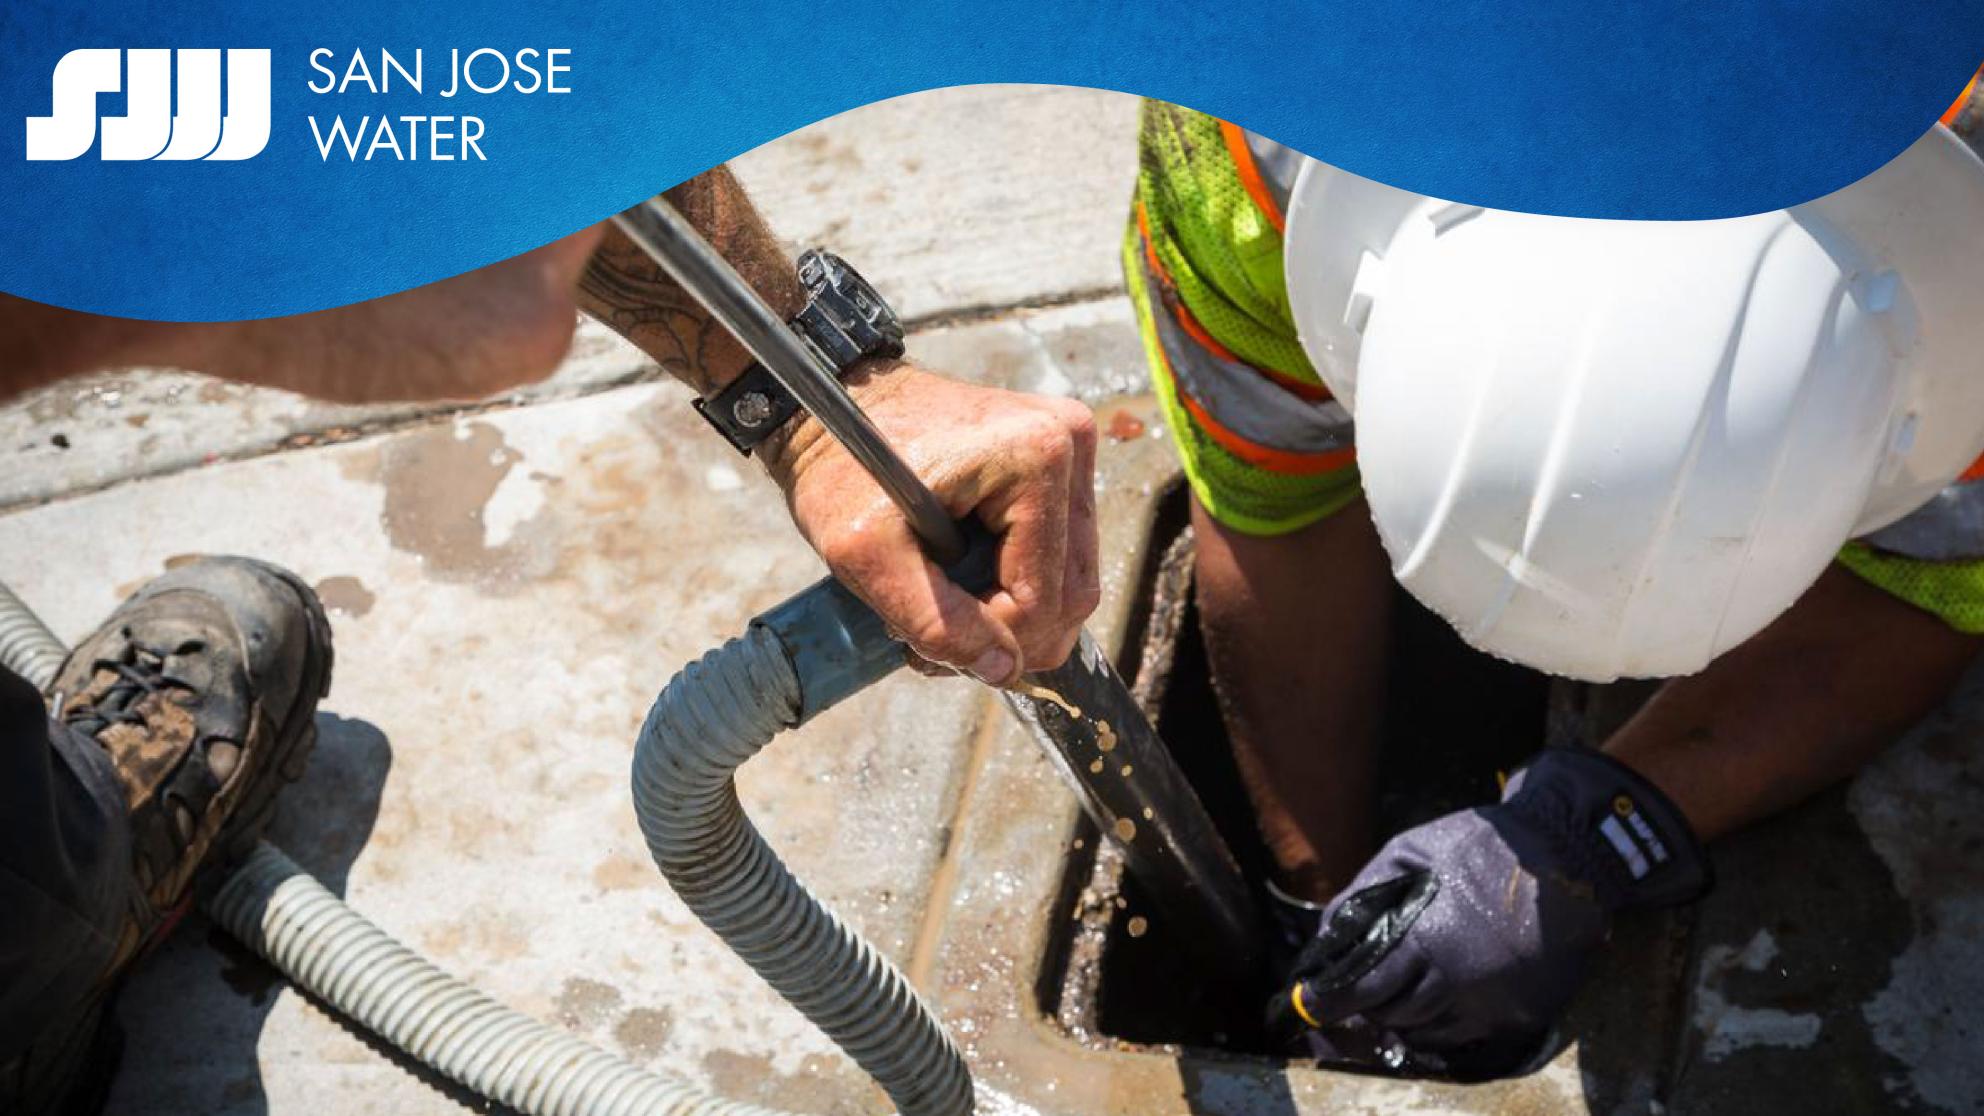 San Jose Water logo and water infrastructure work